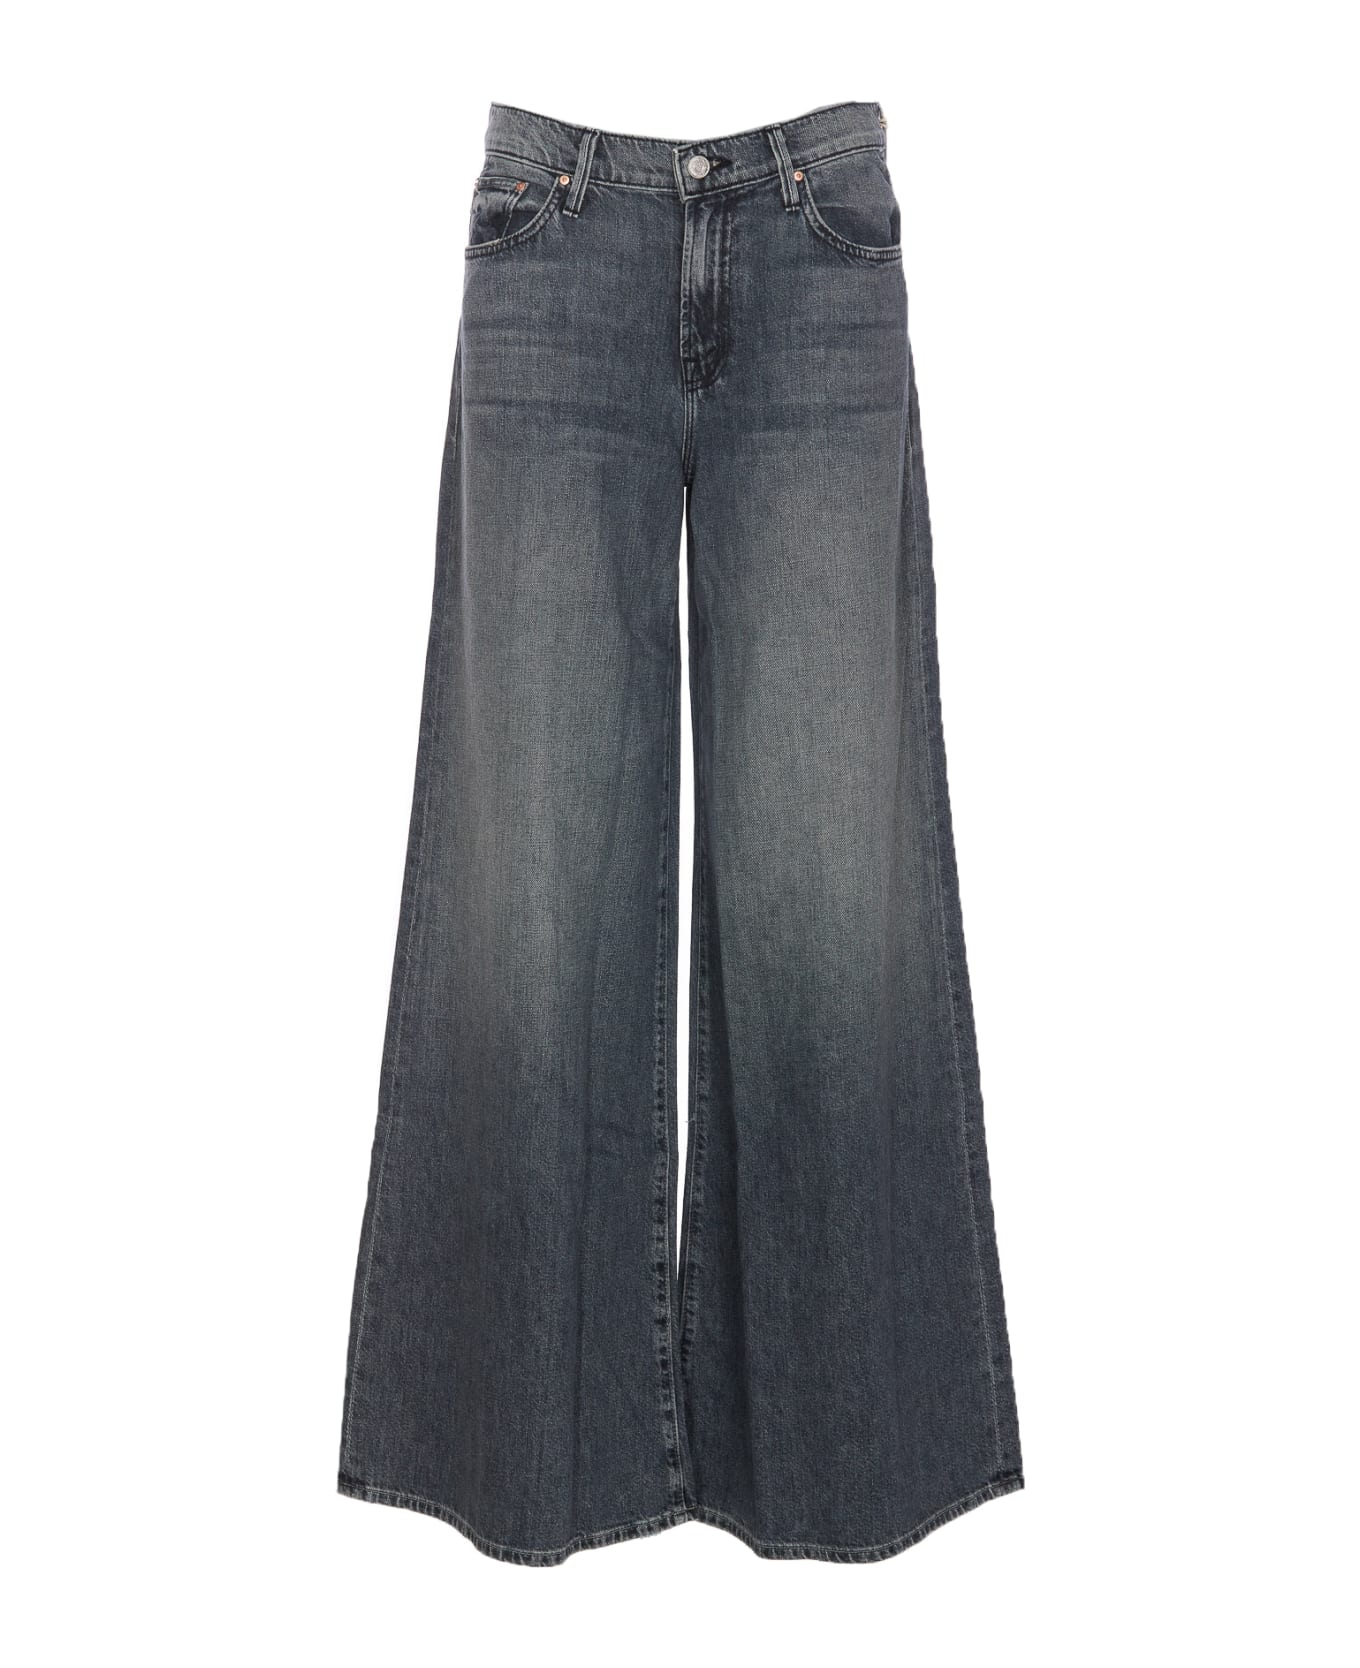 Mother The Swisher Jeans - Black デニム